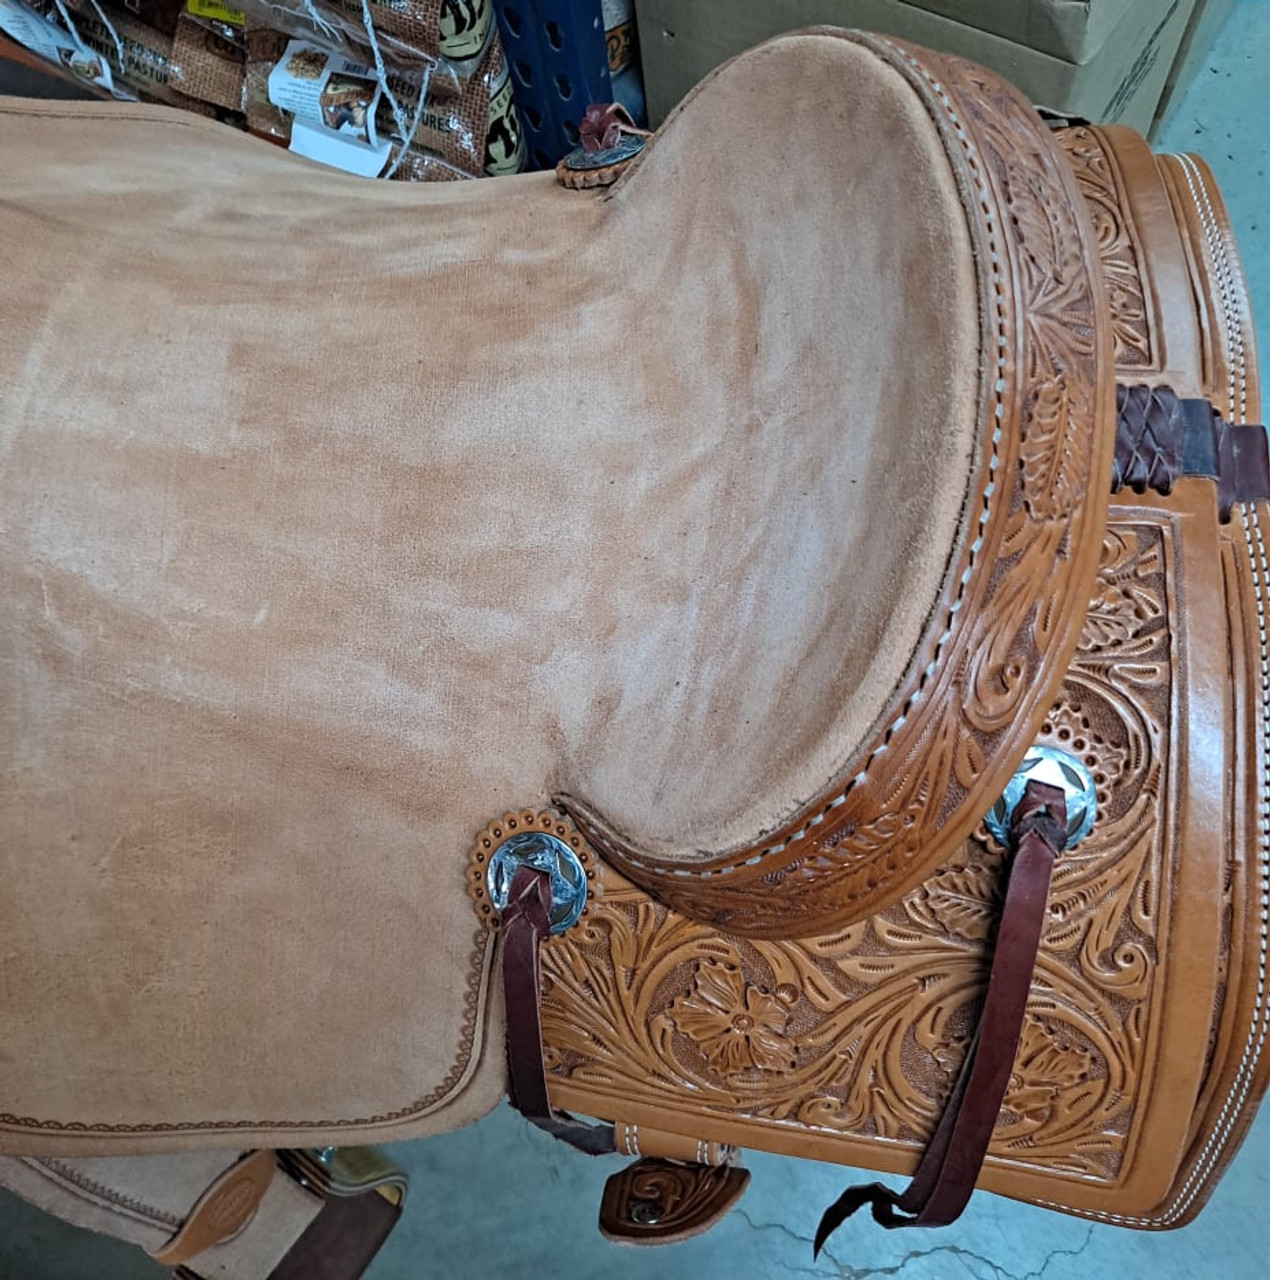 New Cutting Saddle by Fort Worth Saddle Co with 17 inch seat. Hermann Oak leather. Square skirt, floral hand tooling. Roughout contact points. Gullet size is 7.25 inch, weight is 30lbs, and skirt is 30 inch. Made in USA. Limited lifetime warranty.

S1388